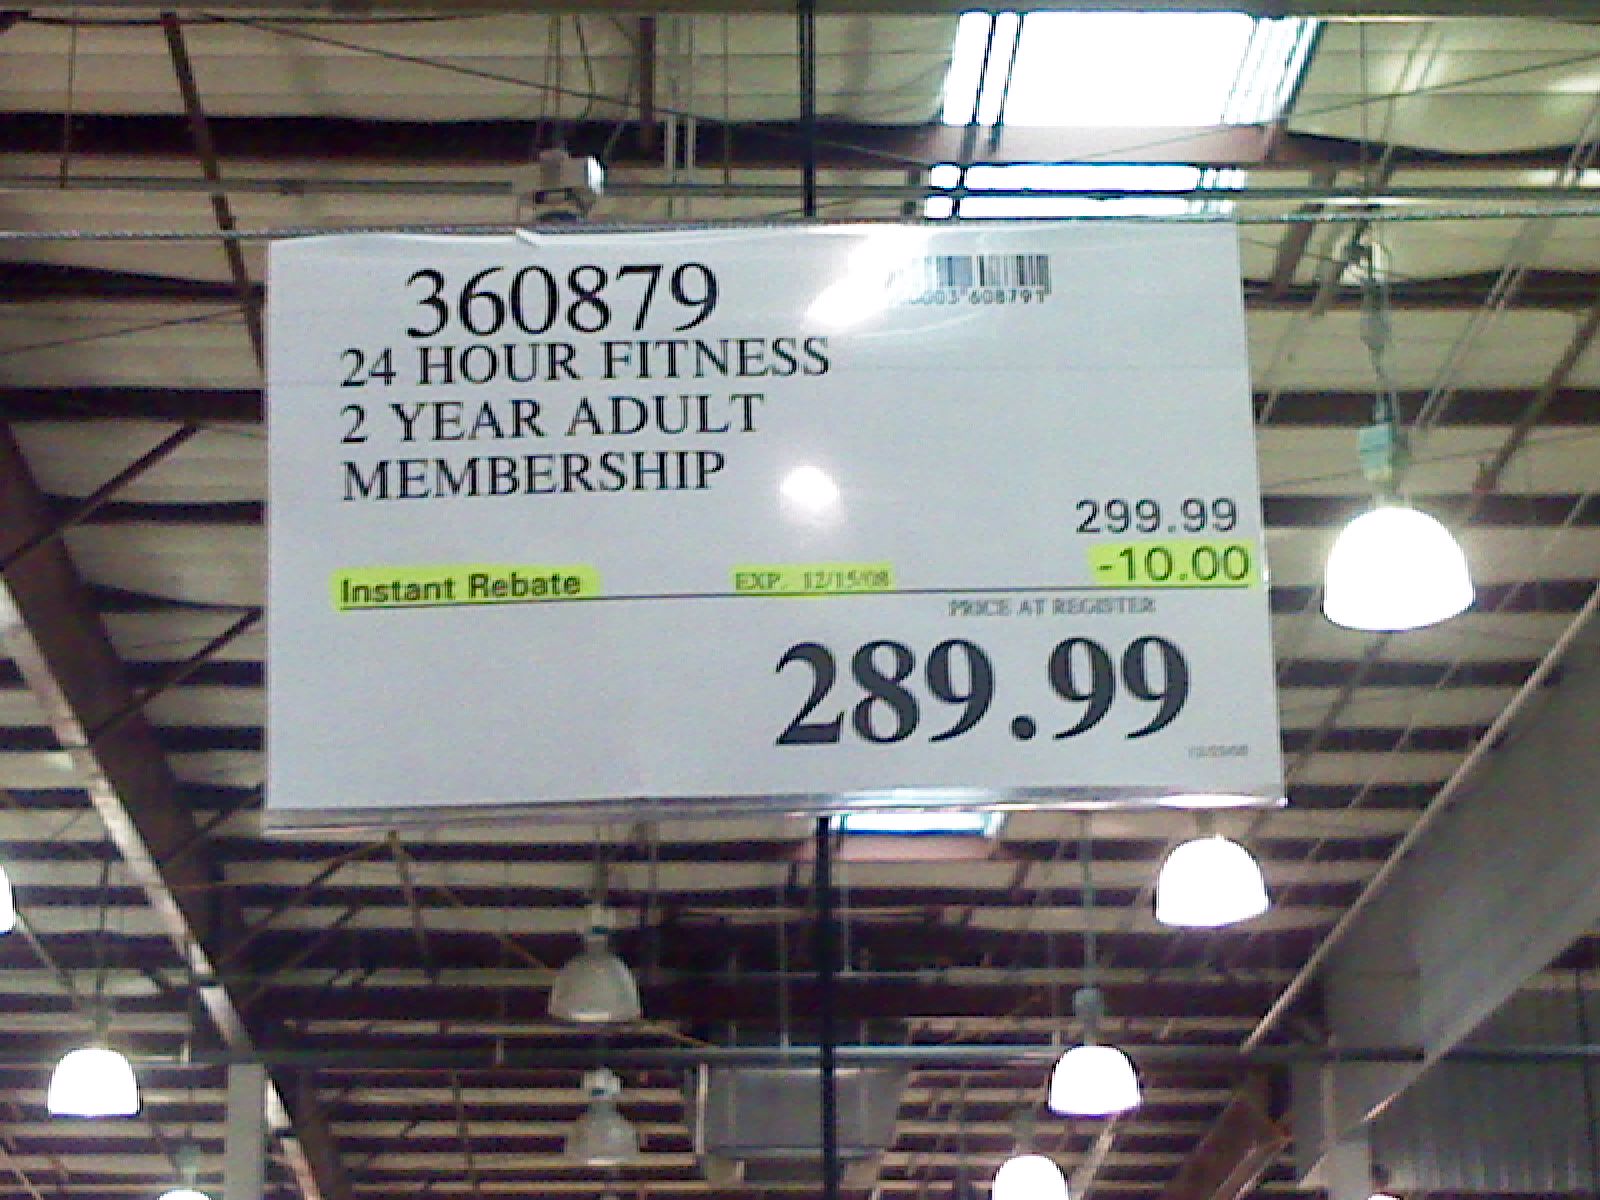 30 Minute 24 Hours Fitness Membership Costco for Gym